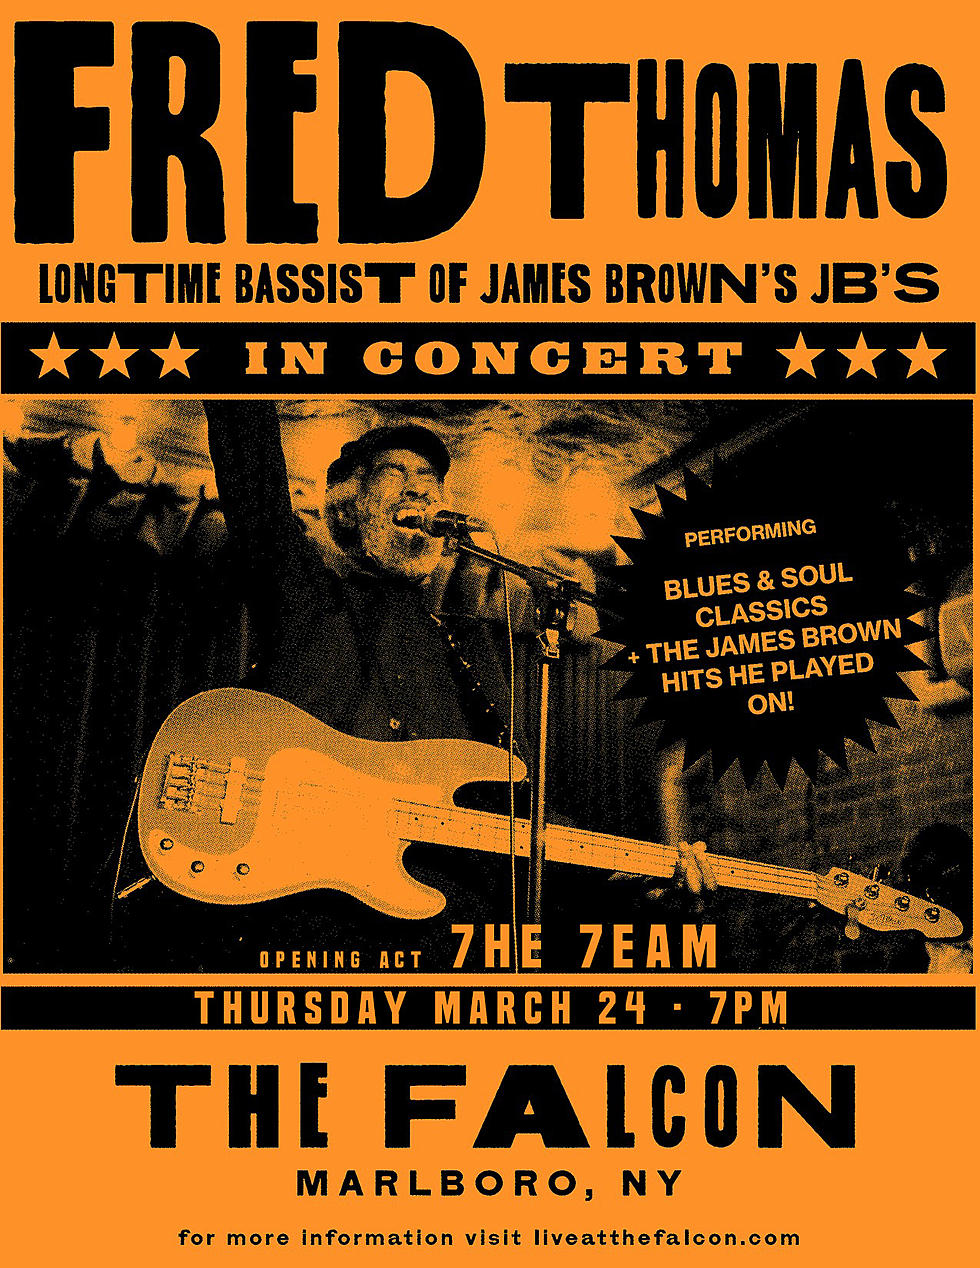 Local Band to Open for James Brown’s Iconic Bassist Fred Thomas at The Falcon